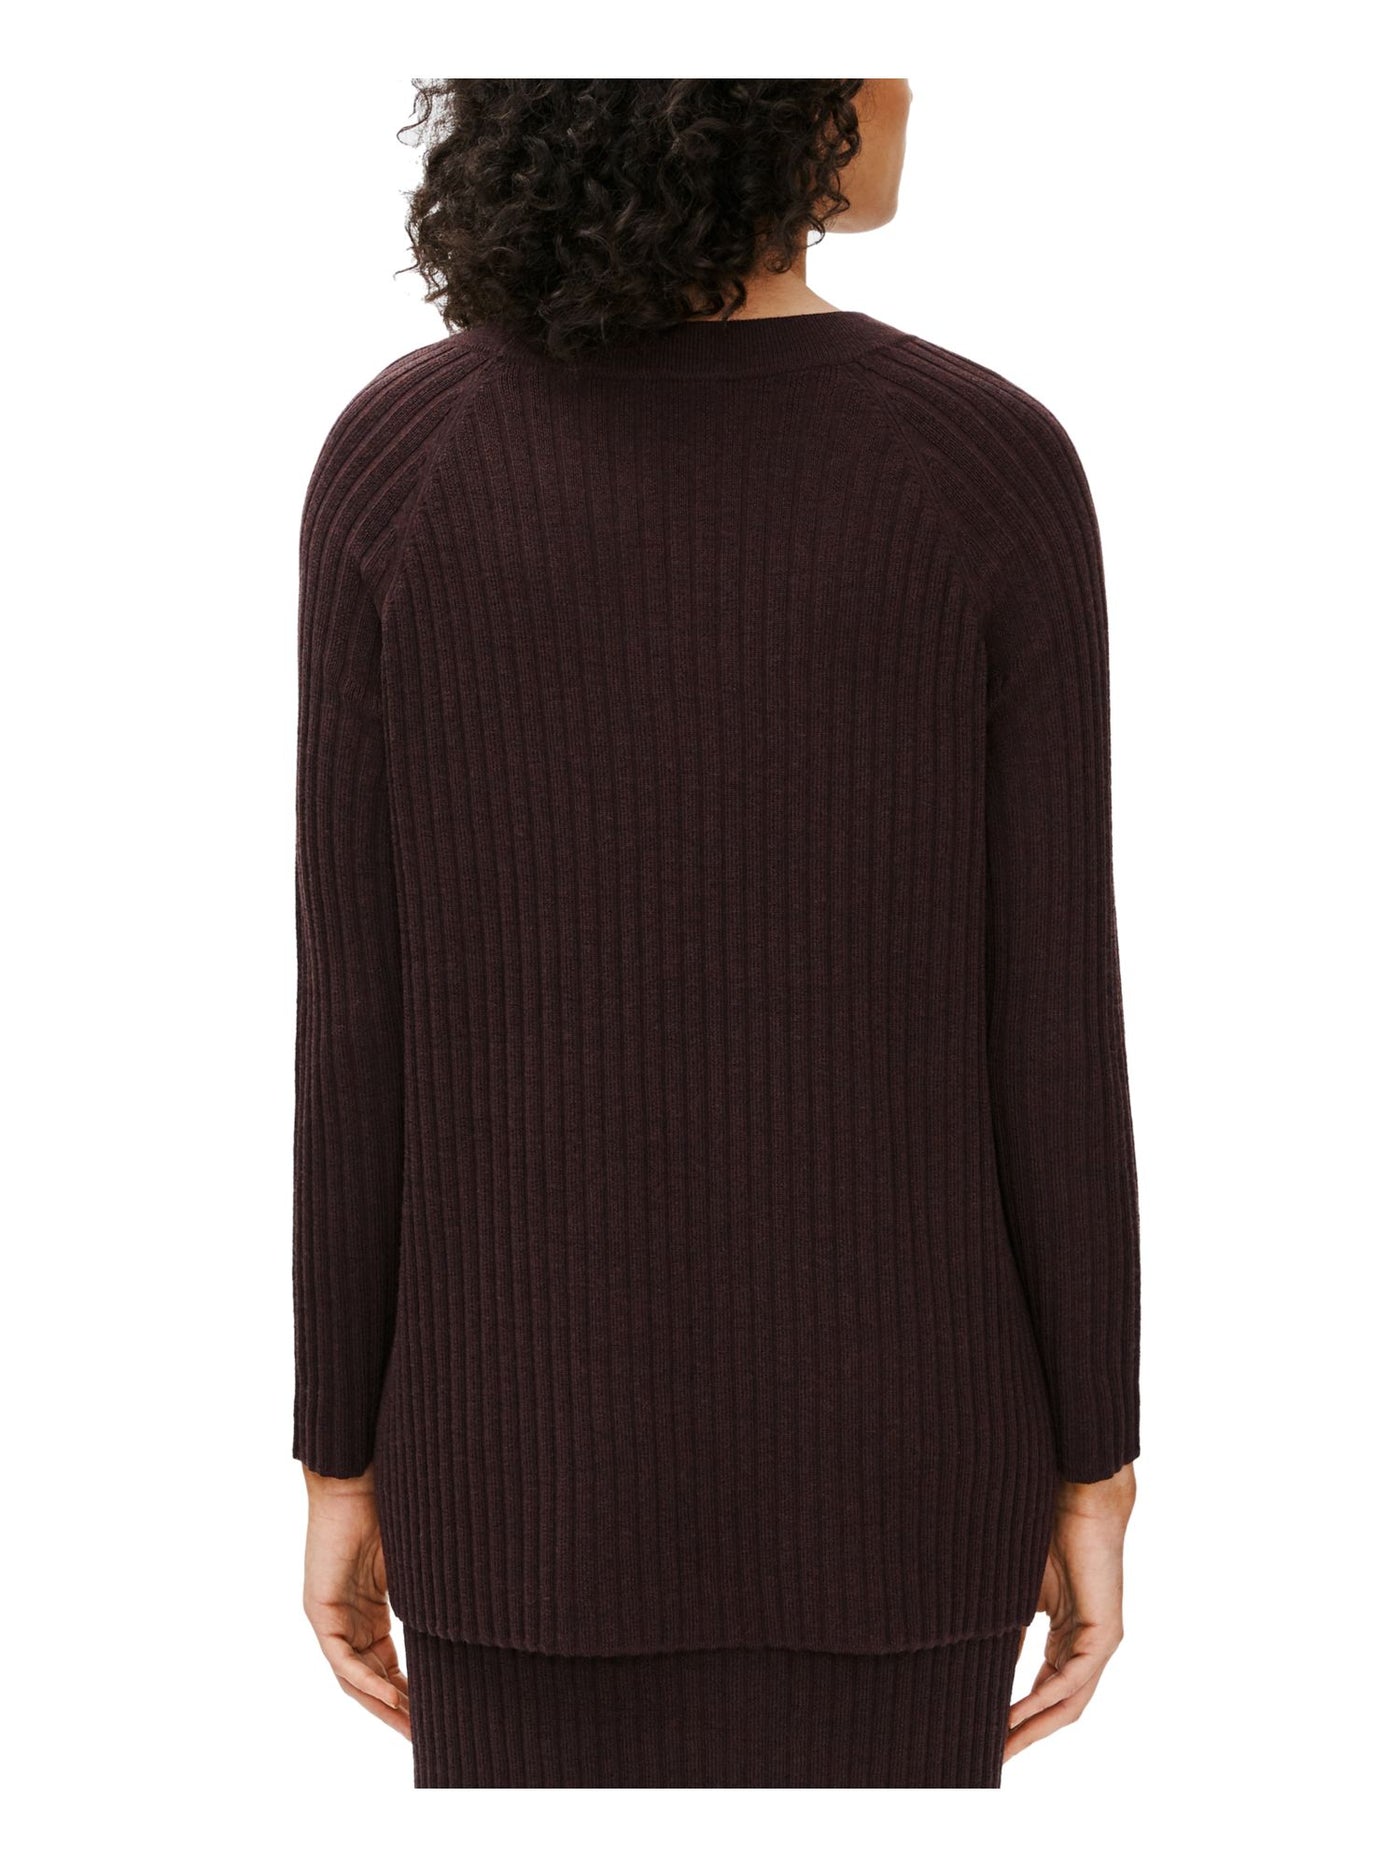 EILEEN FISHER Womens Brown Stretch Ribbed Long Sleeve Crew Neck Sweater M